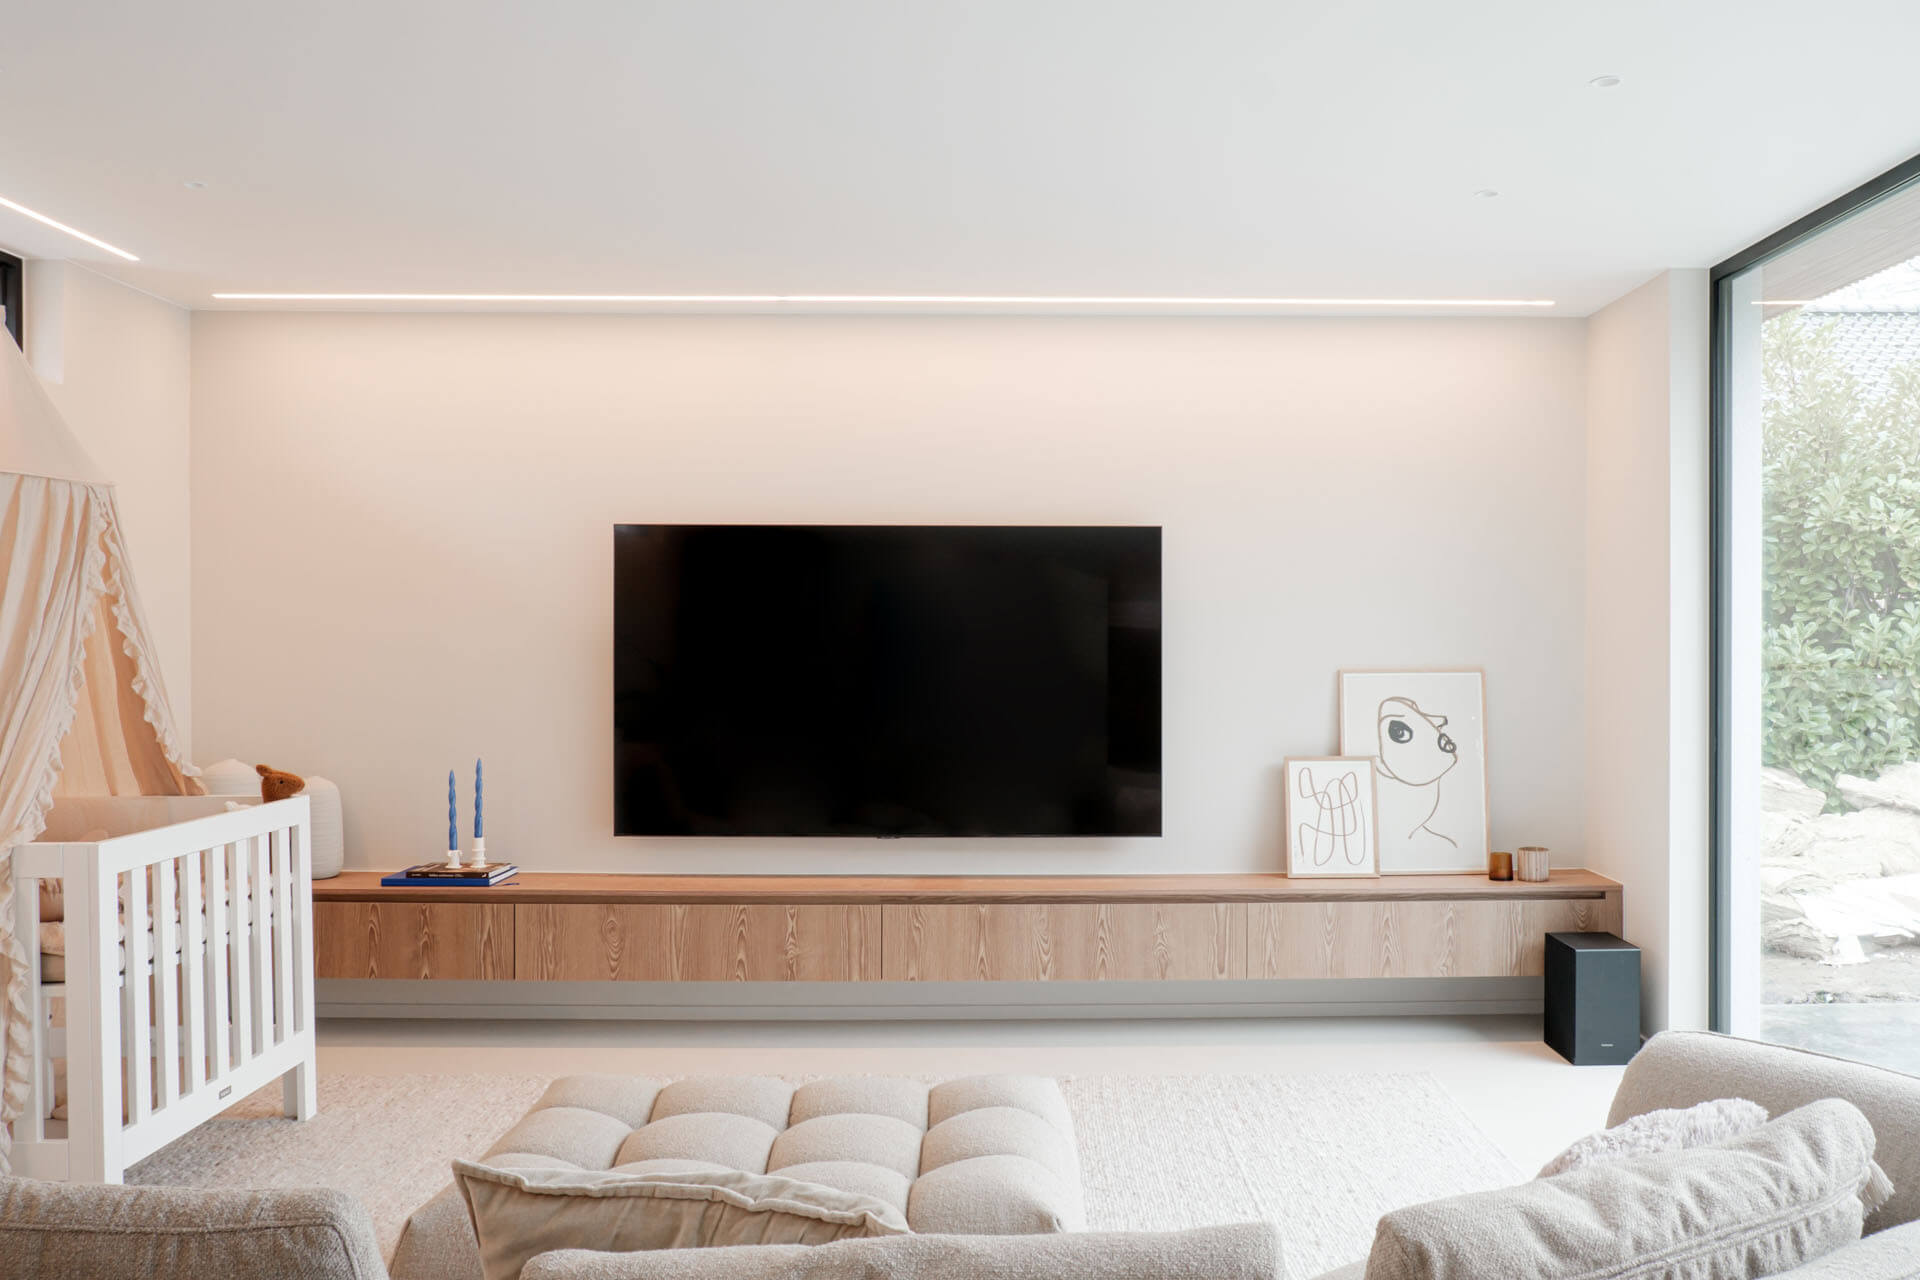 Built-in and floating custom TV cabinet in wood structure